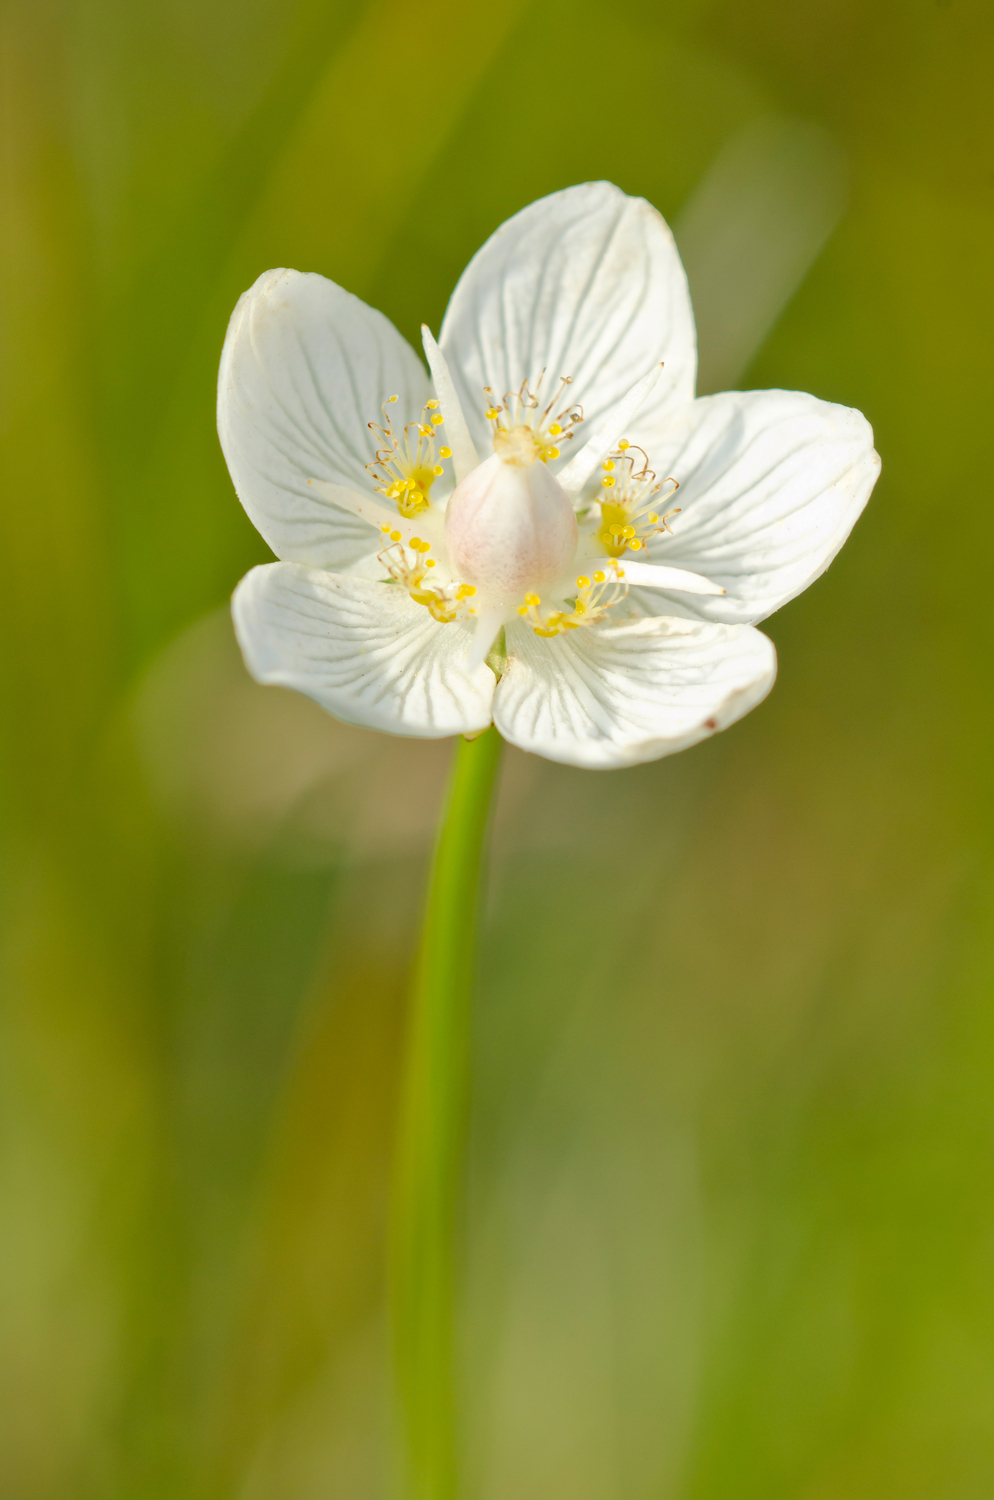 This flowering plant parnassia paulstris is one of the threatened species that was researched as part of the project.